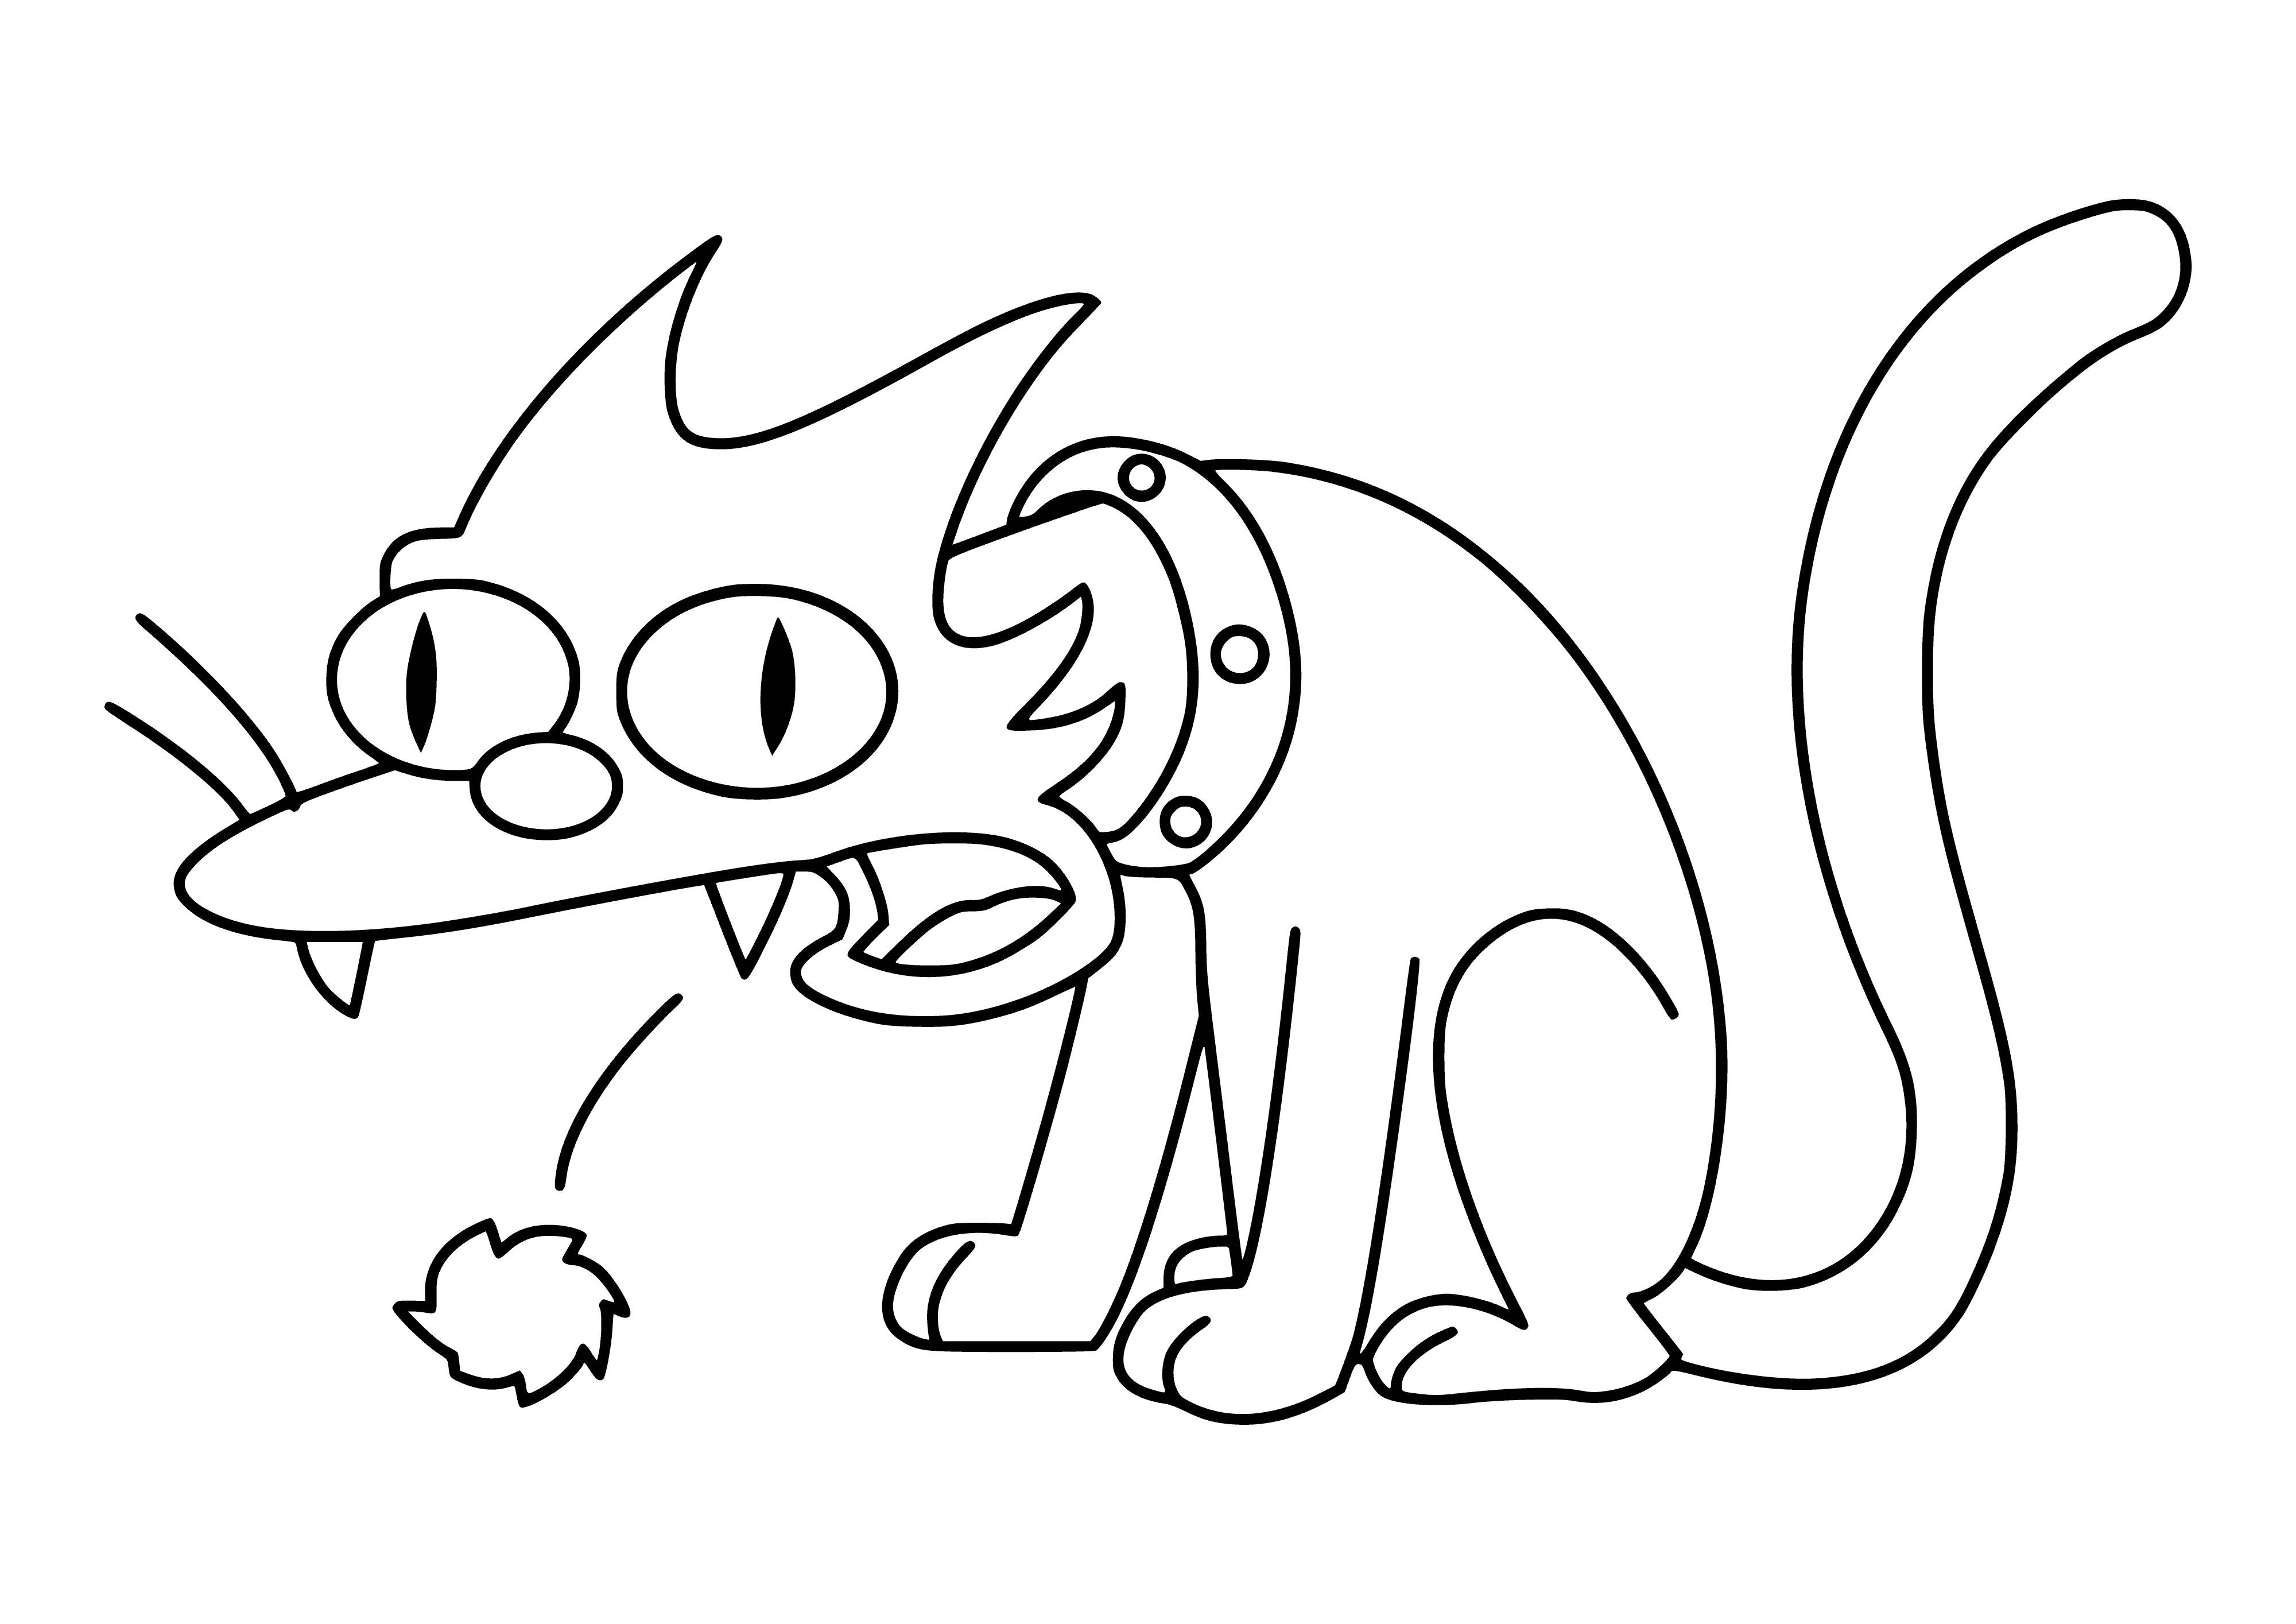 Snowball 5 coloring page